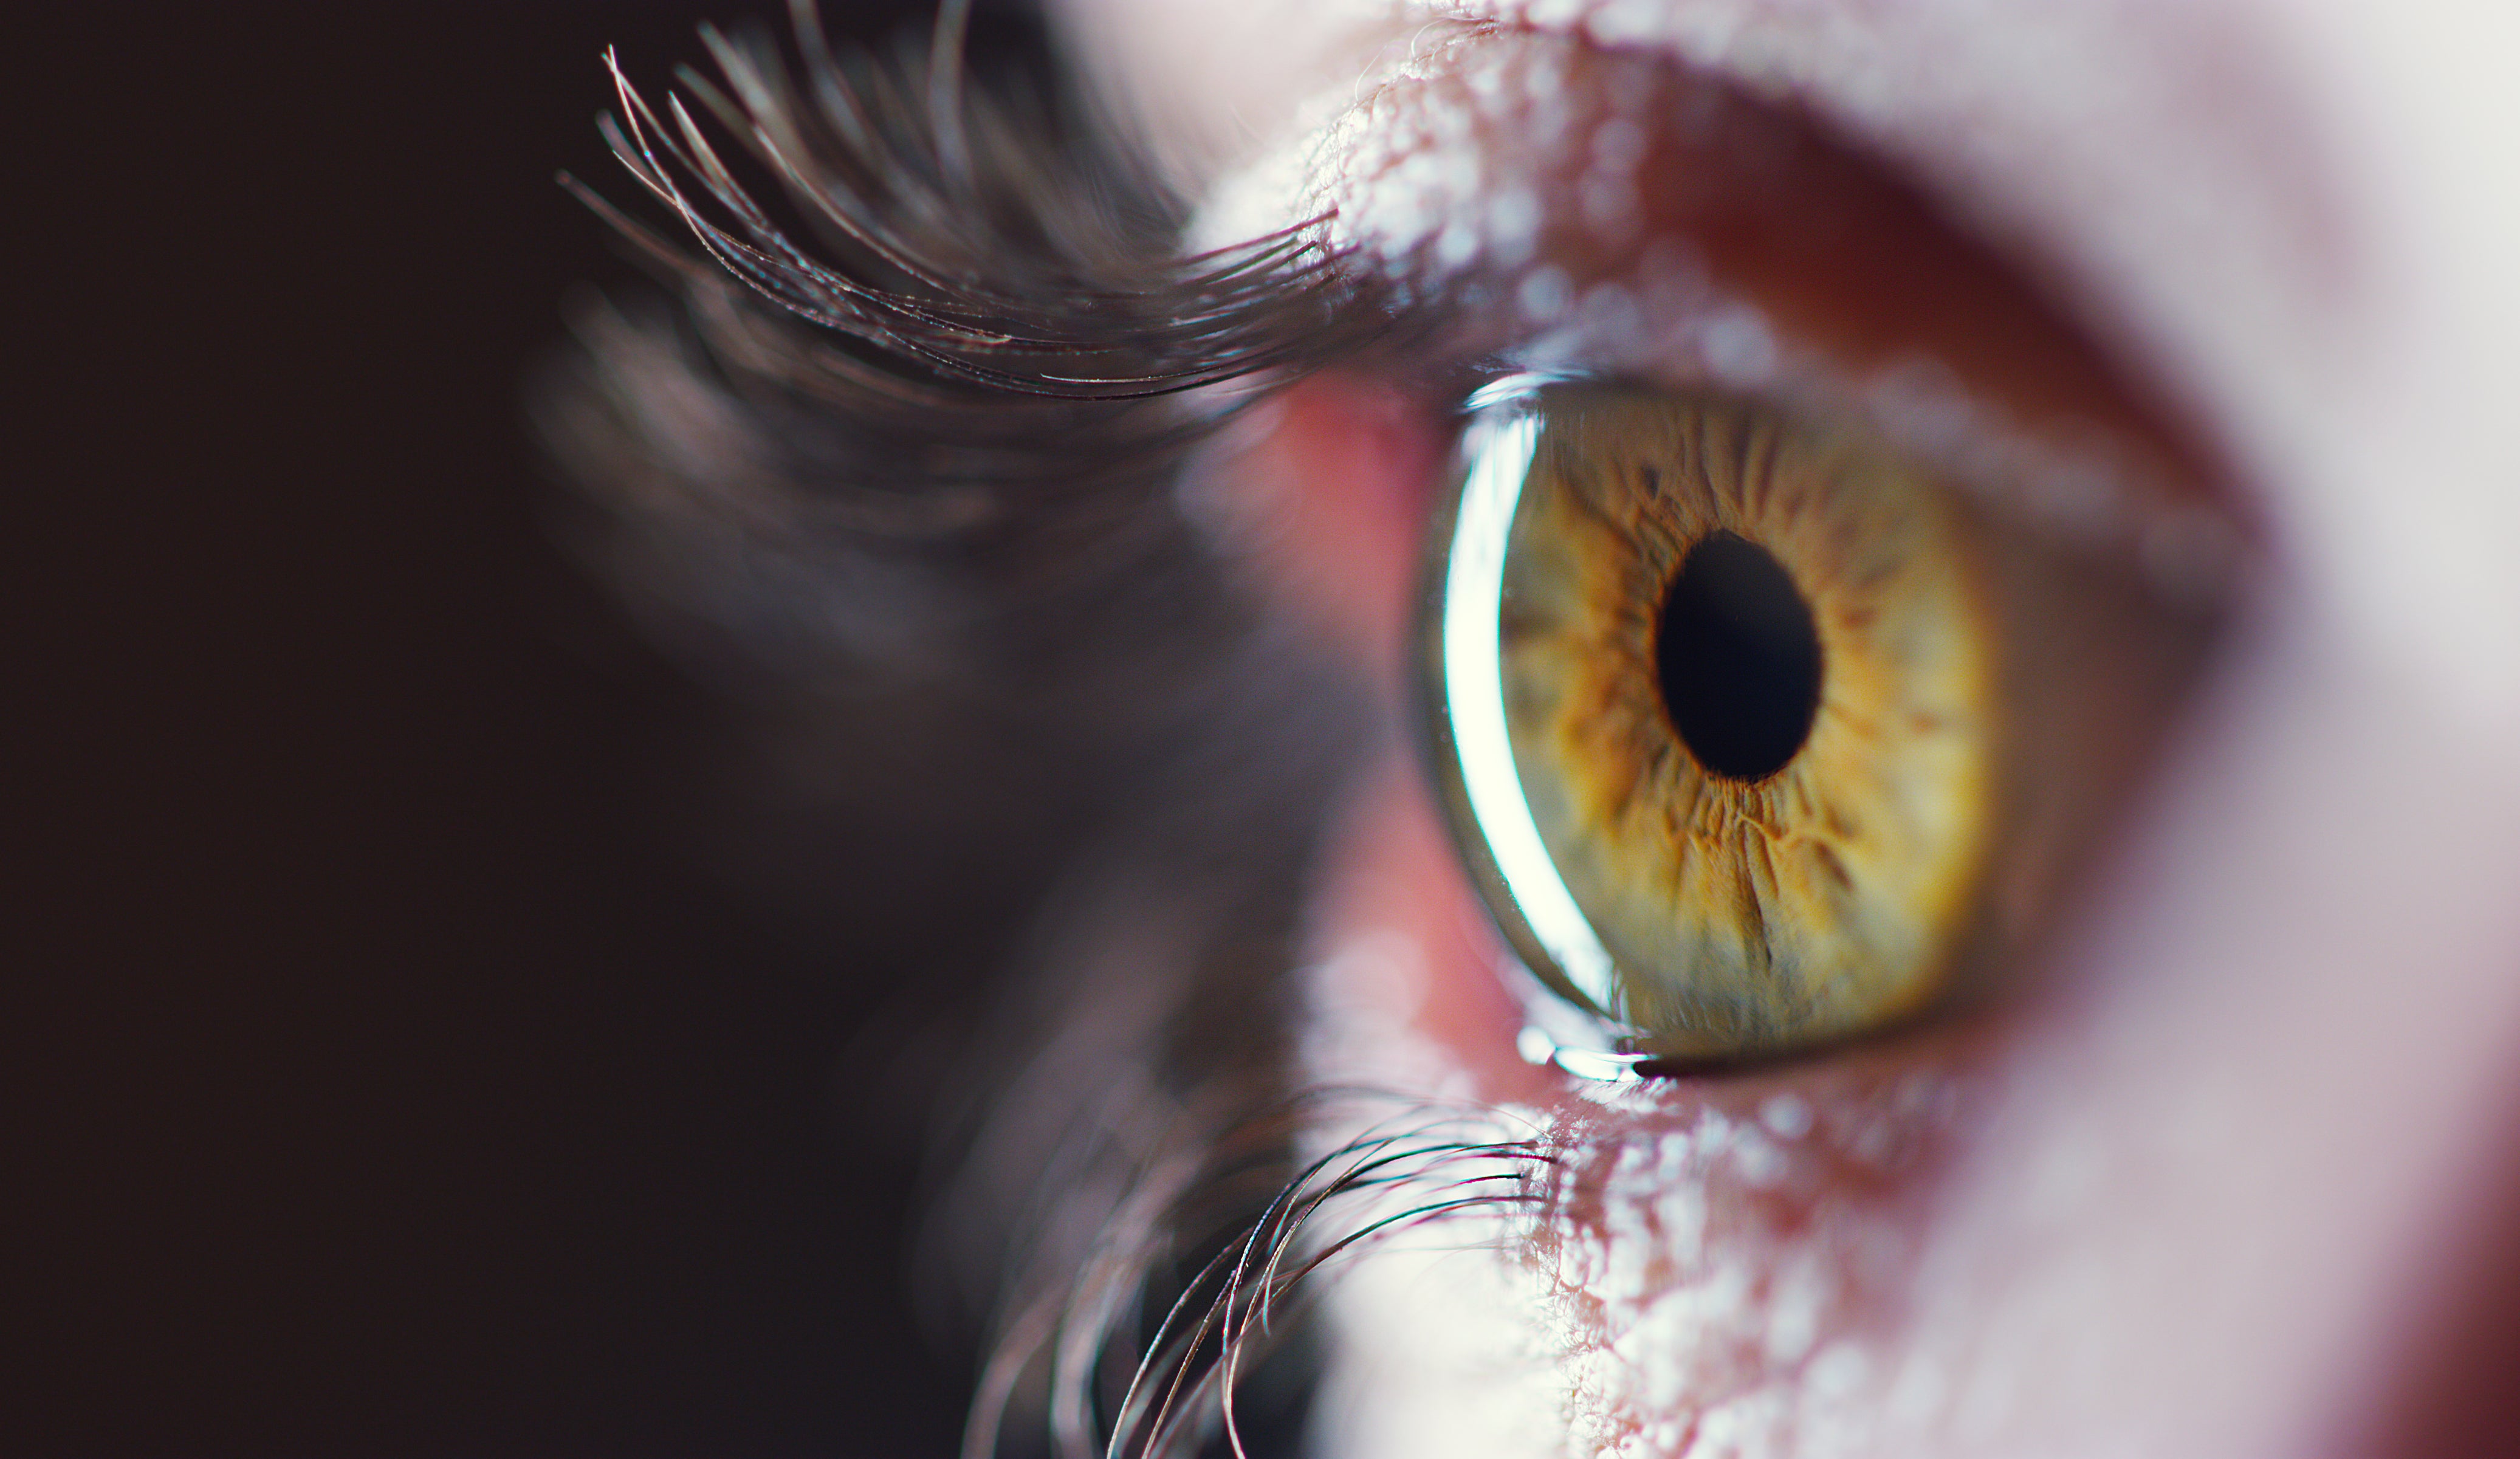 How do our eyes adapt to light and dark?